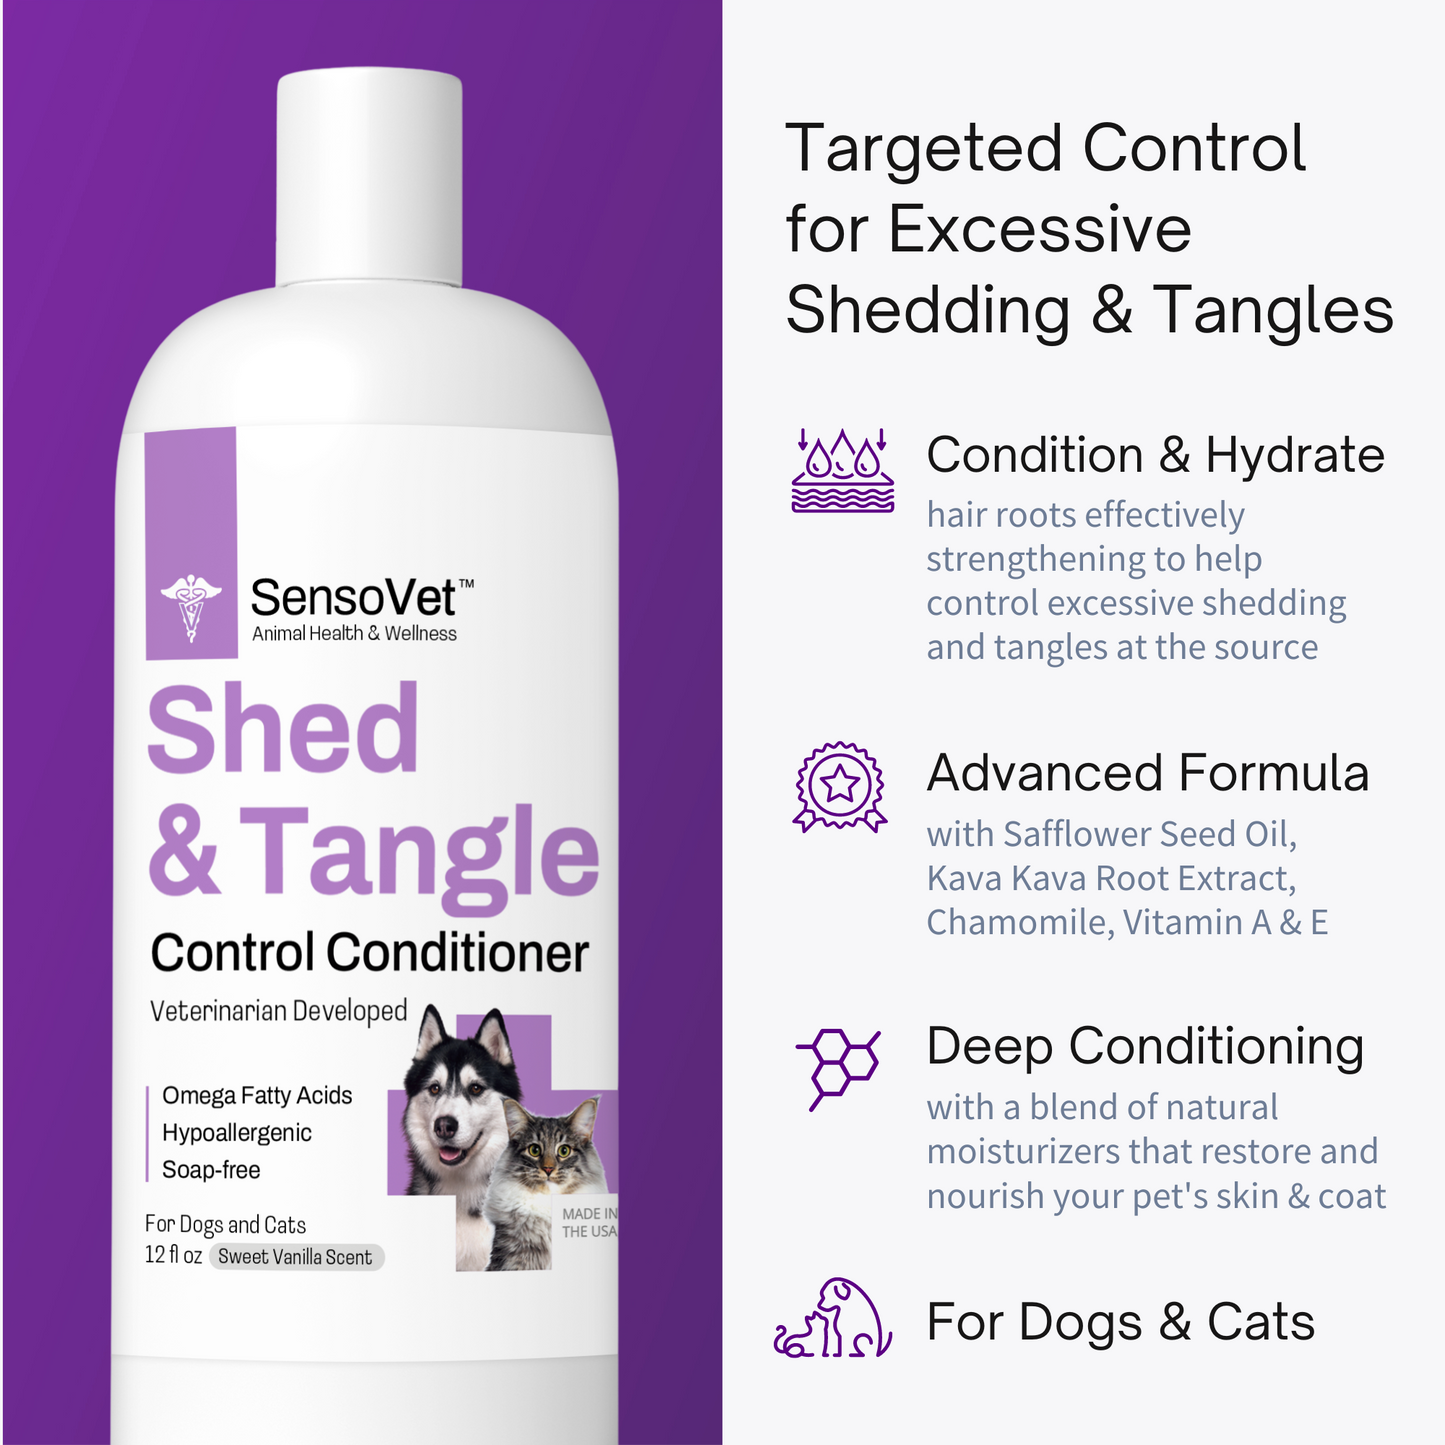 condition and hydrate your dog or cat's hair roots to help control excessive shedding and tangles at the source